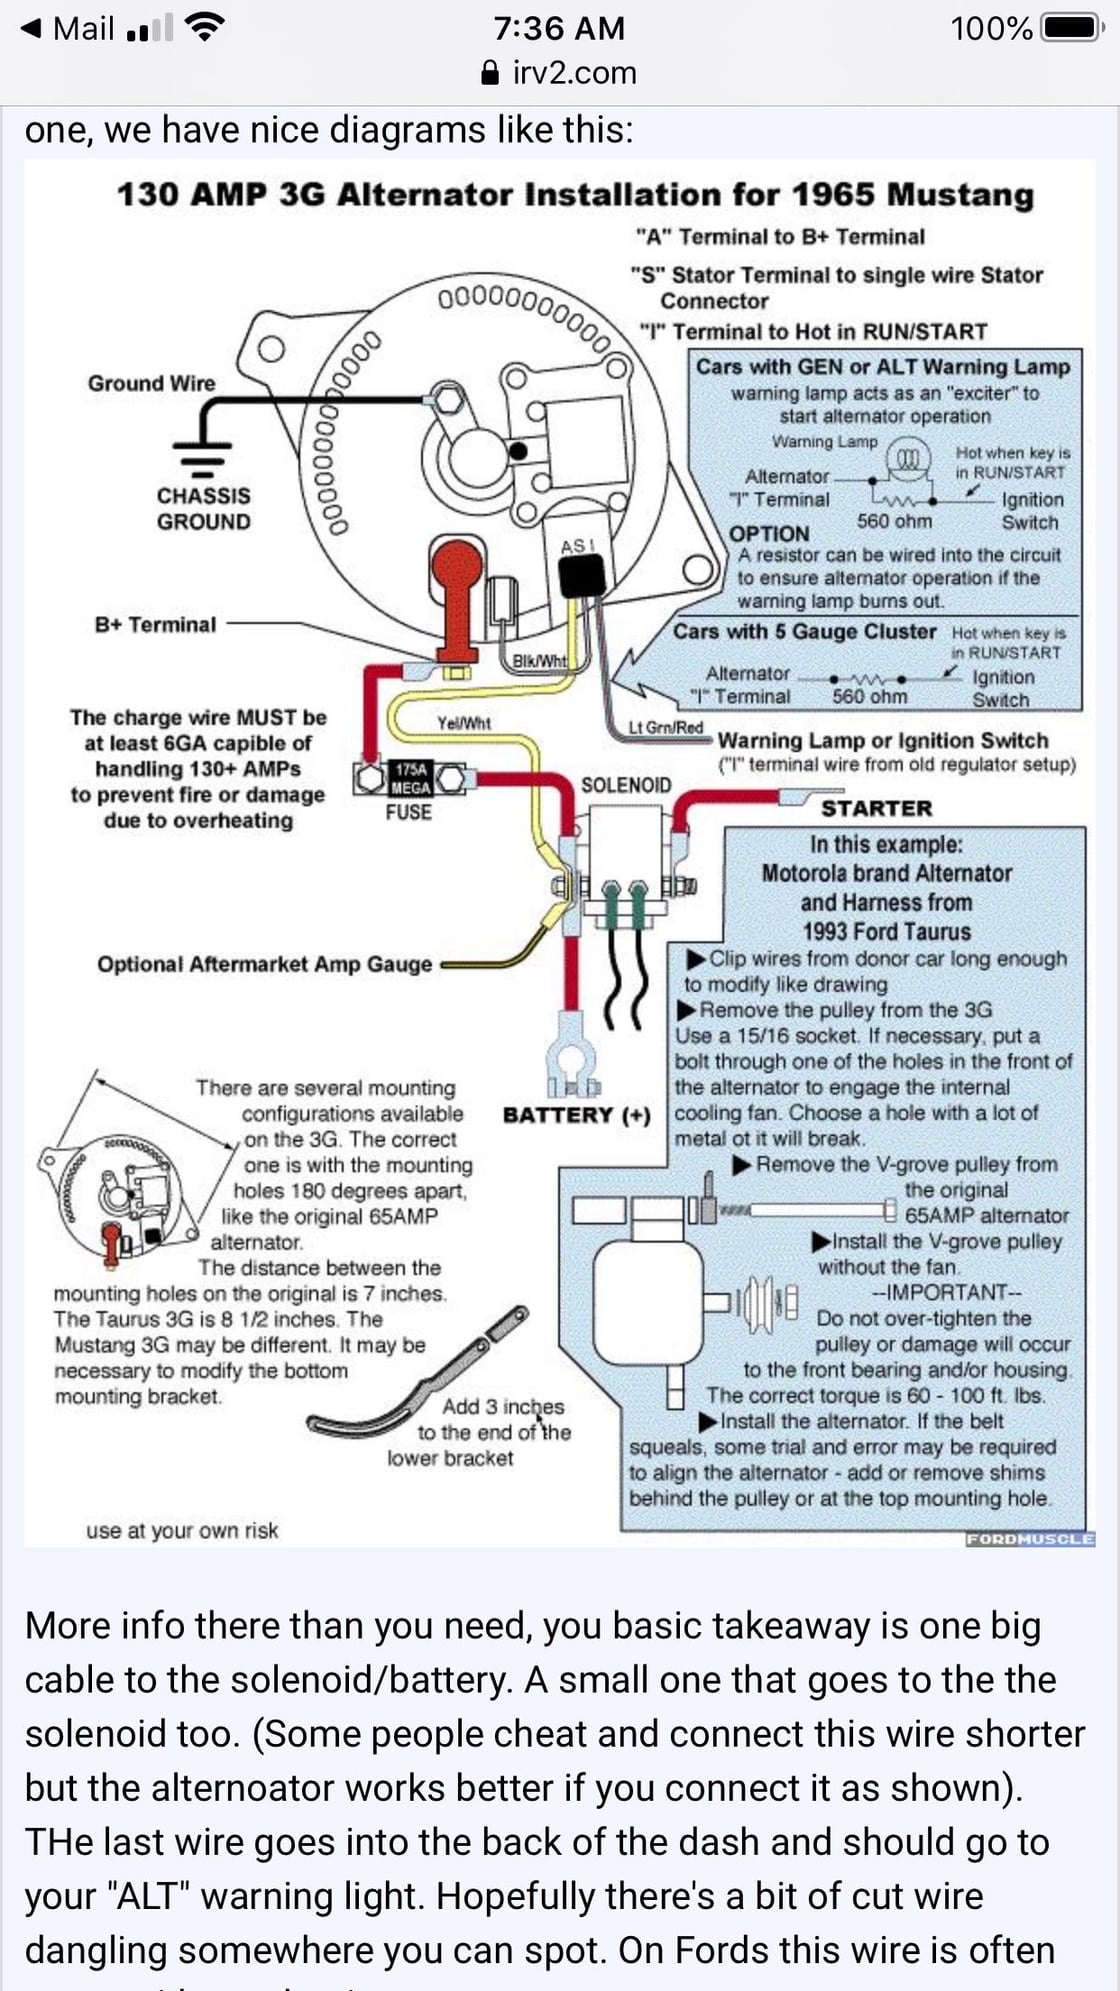 Alternator wiring help please! - Ford Truck Enthusiasts Forums  1995 Ford F350 Wiring Diagram 460 Motor    Ford Truck Enthusiasts